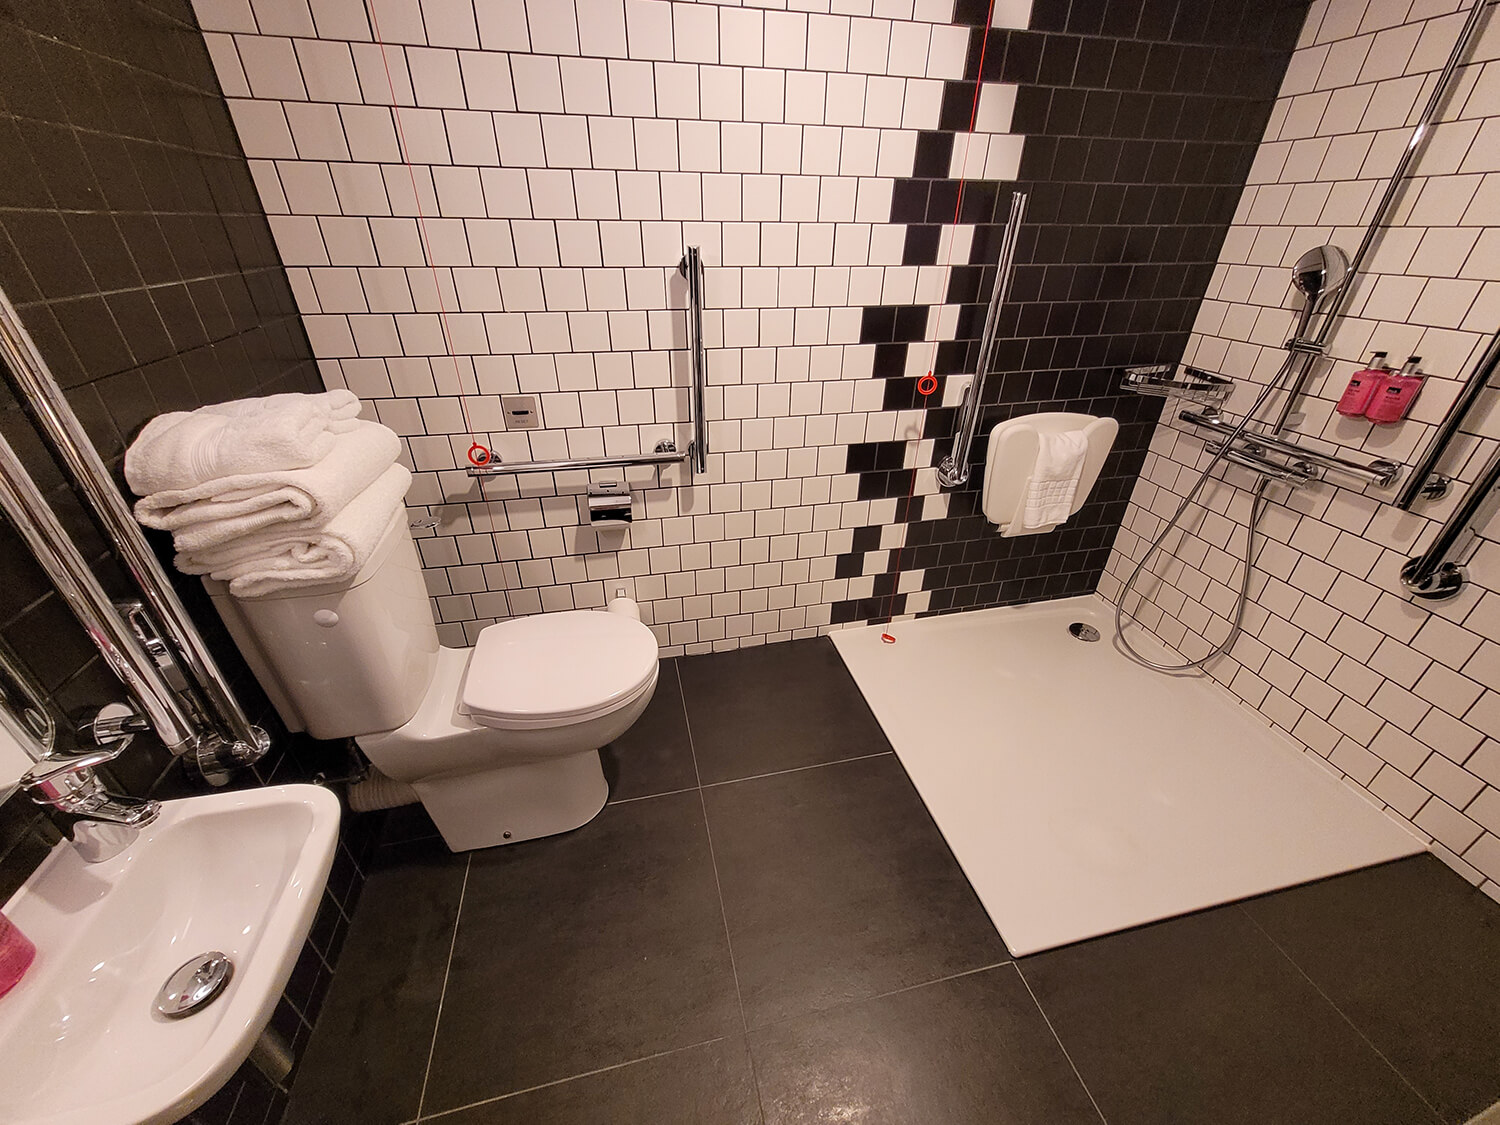 An accessible bathroom with a roll-in shower and wall mounted shower seat at the Moxy Manchester City hotel.